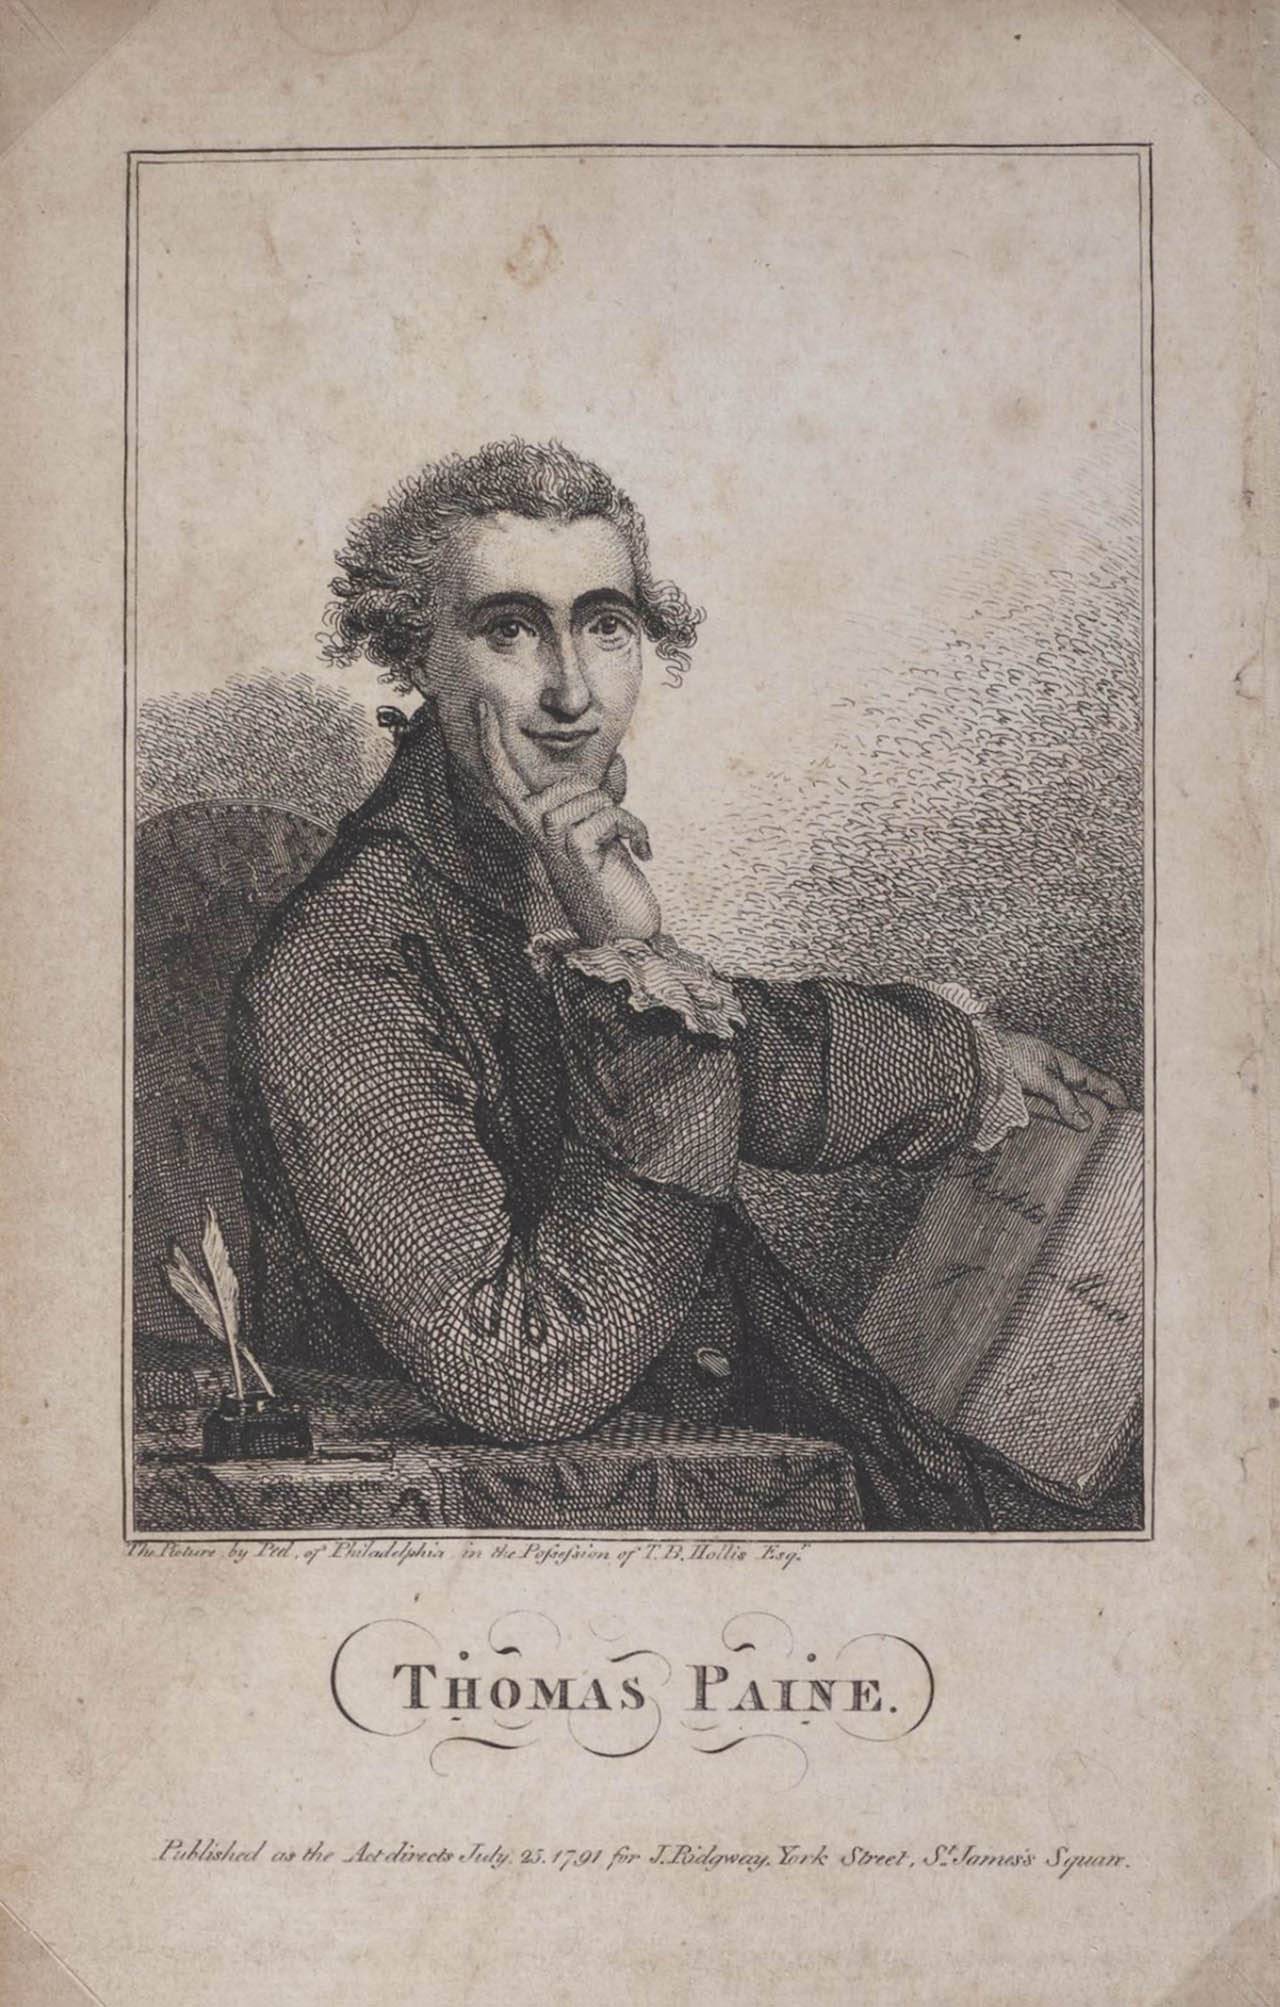 A print of Thomas Paine from 1791